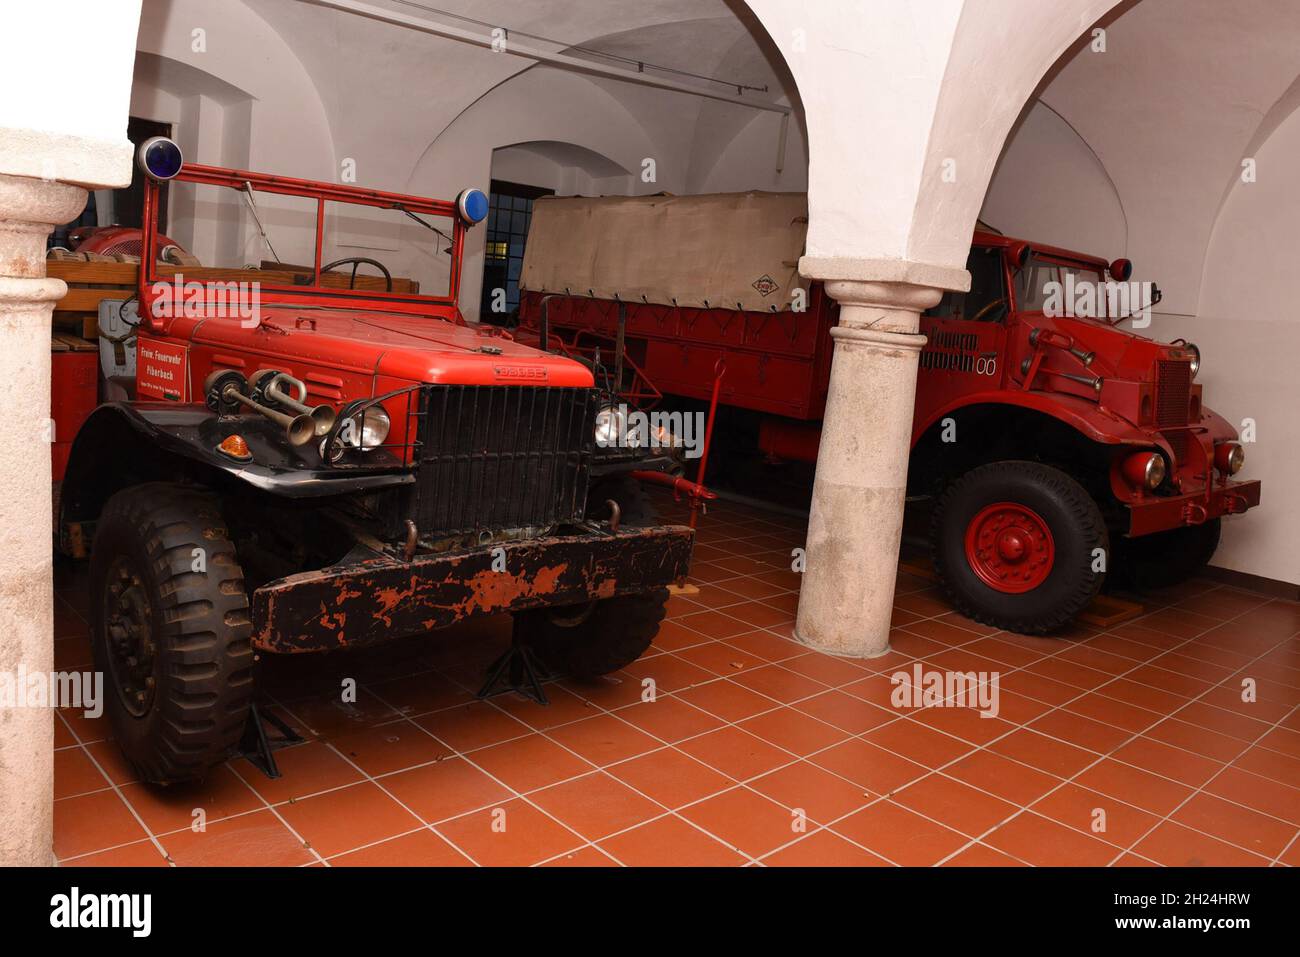 Feuerwehr Museum High Resolution Stock Photography and Images - Alamy